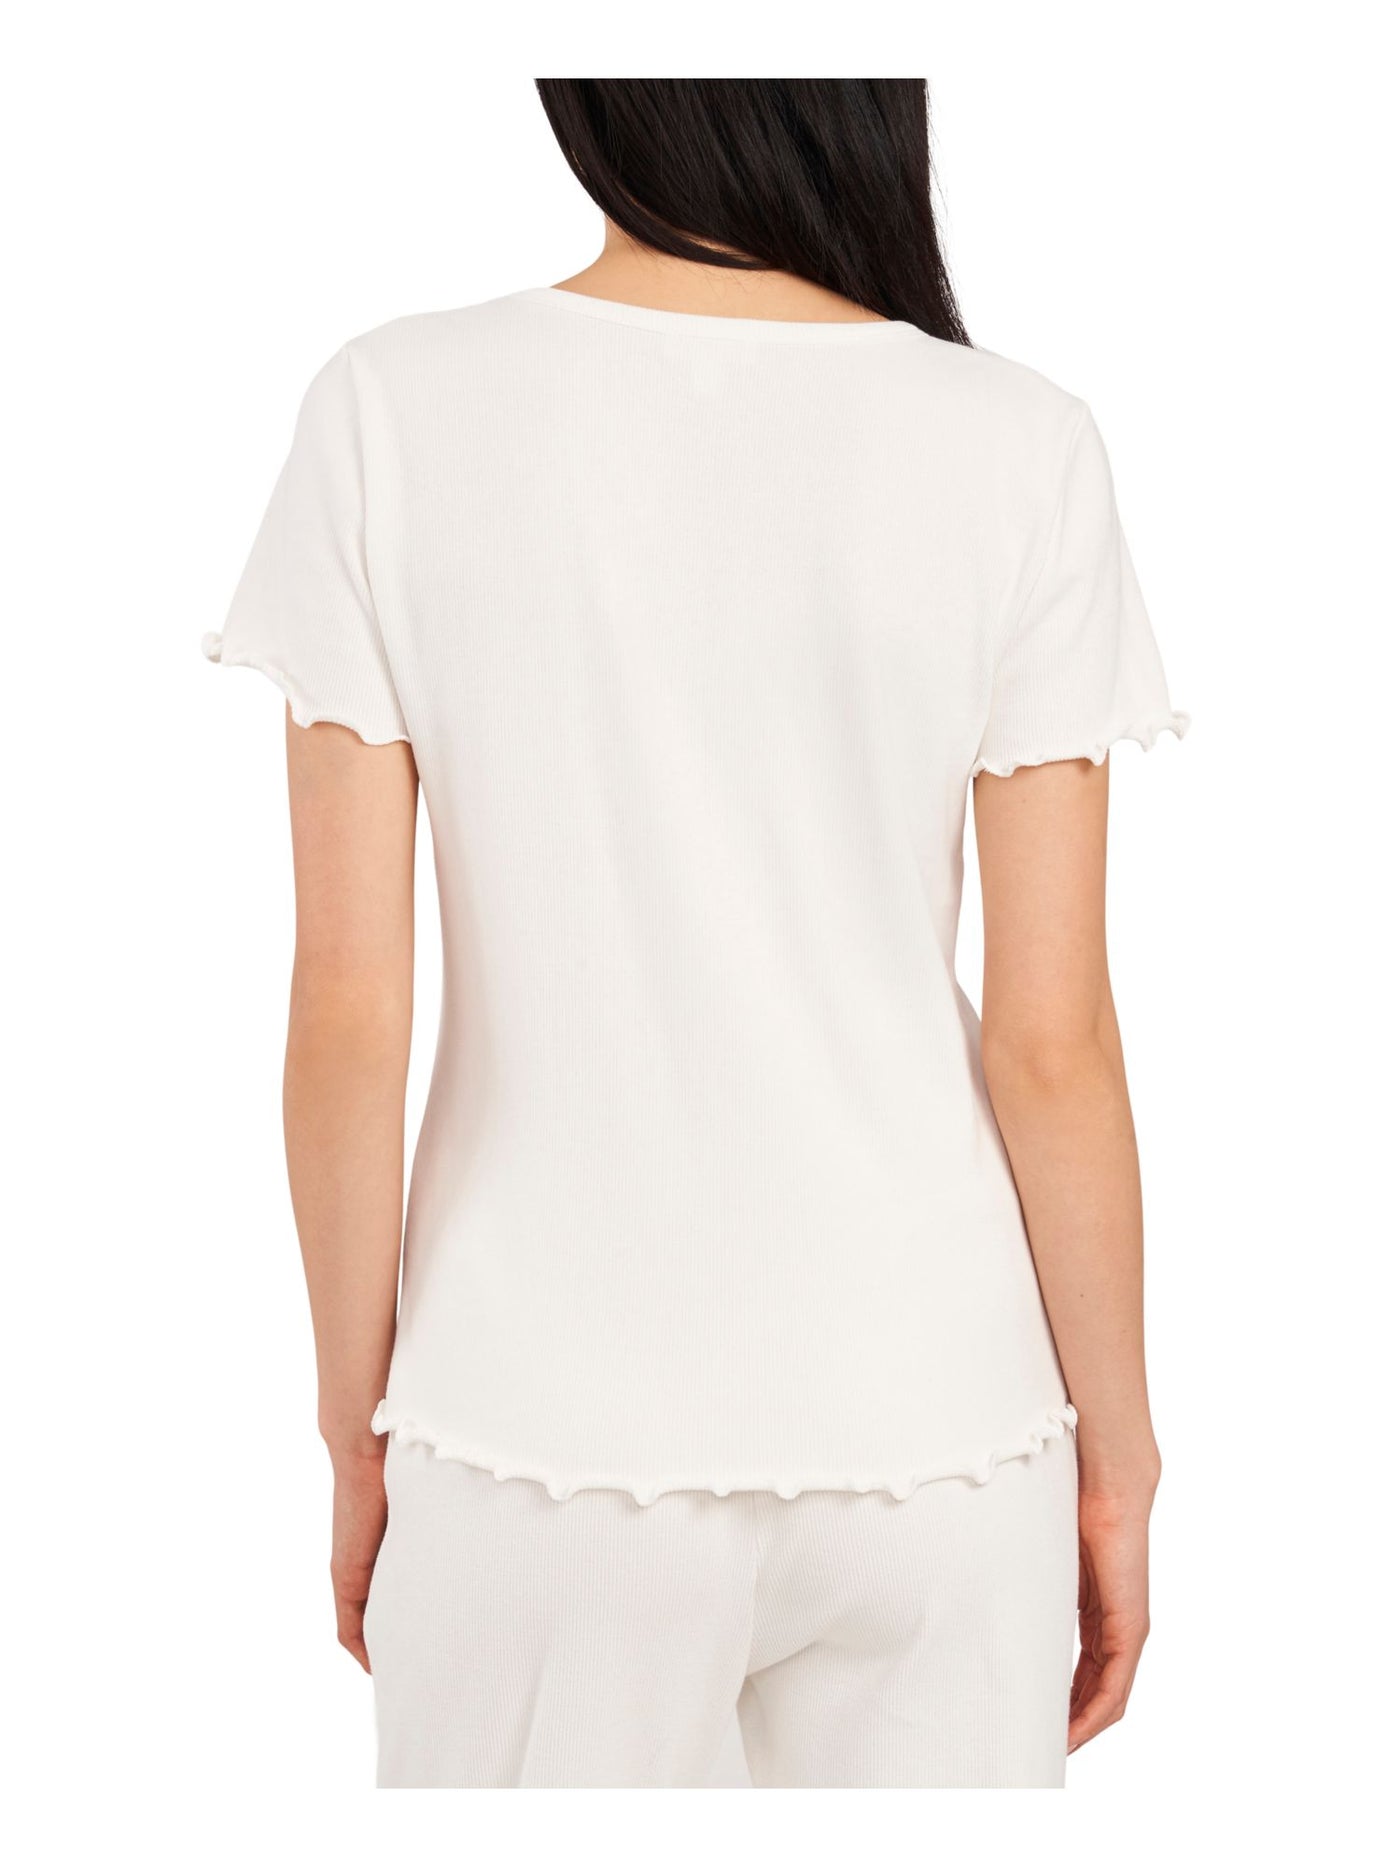 RILEY&RAE Womens White Stretch Ribbed Lettuce Edge Cuffs And Hem Short Sleeve V Neck Top M